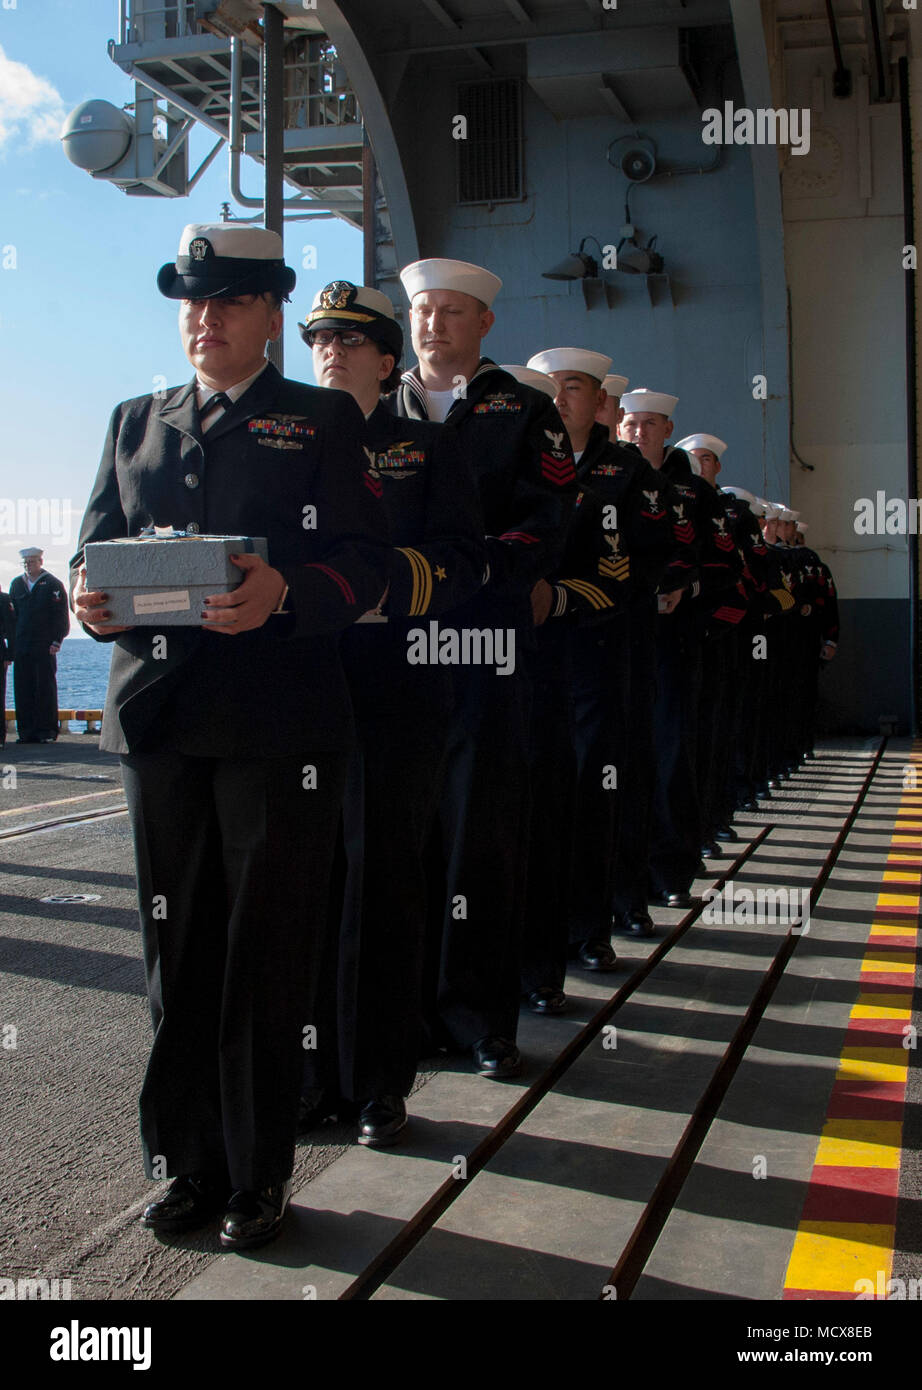 180304-N-HT134-035  PACIFIC OCEAN (March 4, 2018) Sailors assigned to the amphibious assault ship USS America (LHA 6) participate in a burial-at-sea ceremony on the ship’s starboard elevator. America is underway off the coast of southern California preparing for an ammunitions offload prior to entering a planned maintenance availability period. (U.S. Navy photo by Mass Communication Specialist Seaman Daniel Pastor/Released) Stock Photo